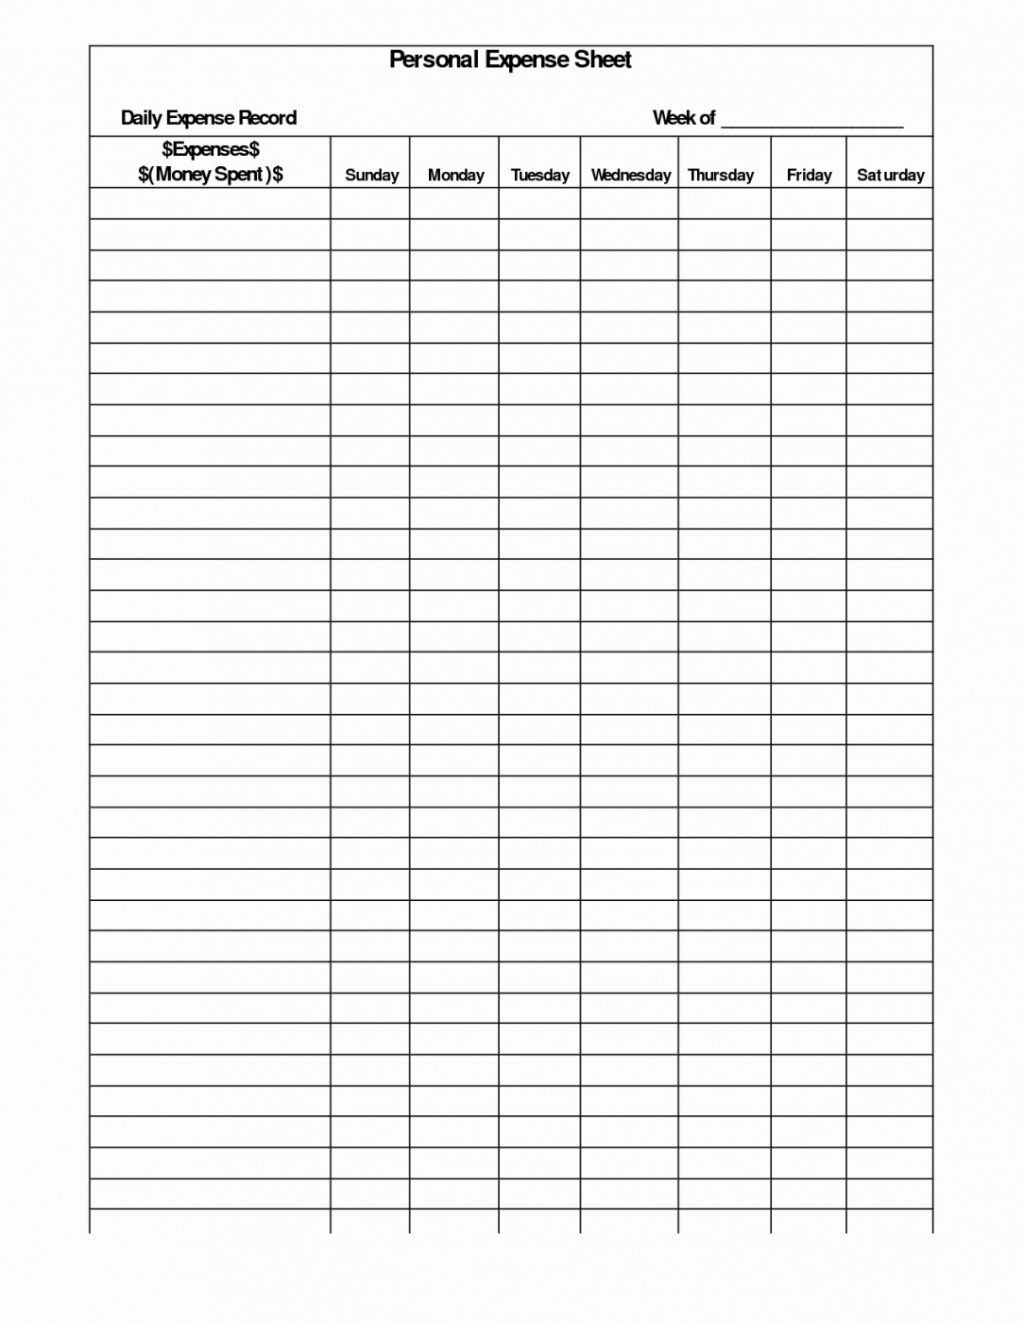 Farm Expense Spreadsheet Template with Horse Farm Expense Spreadsheet